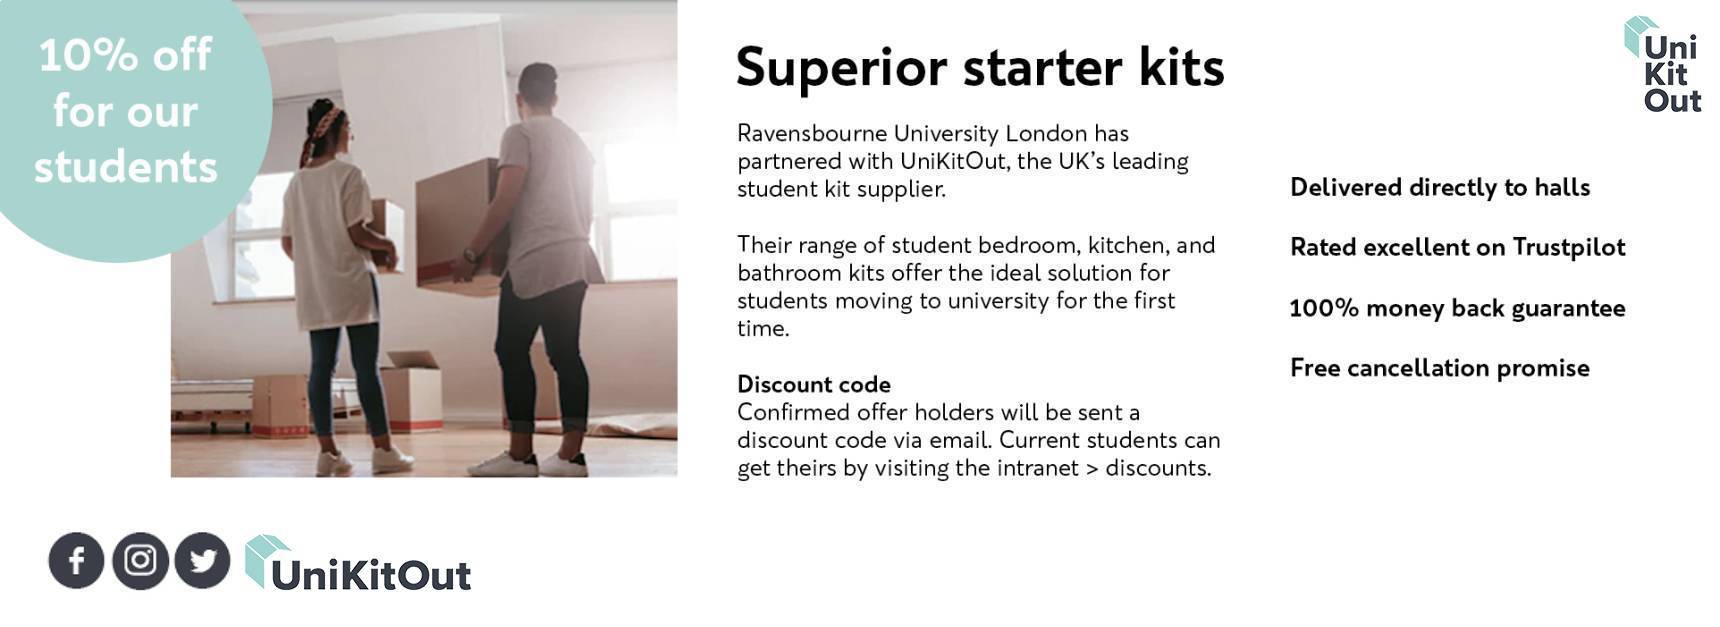 UniKitOut promoting 10% discount on bedroom kitchen and bathroom kits for Ravensbourne students.